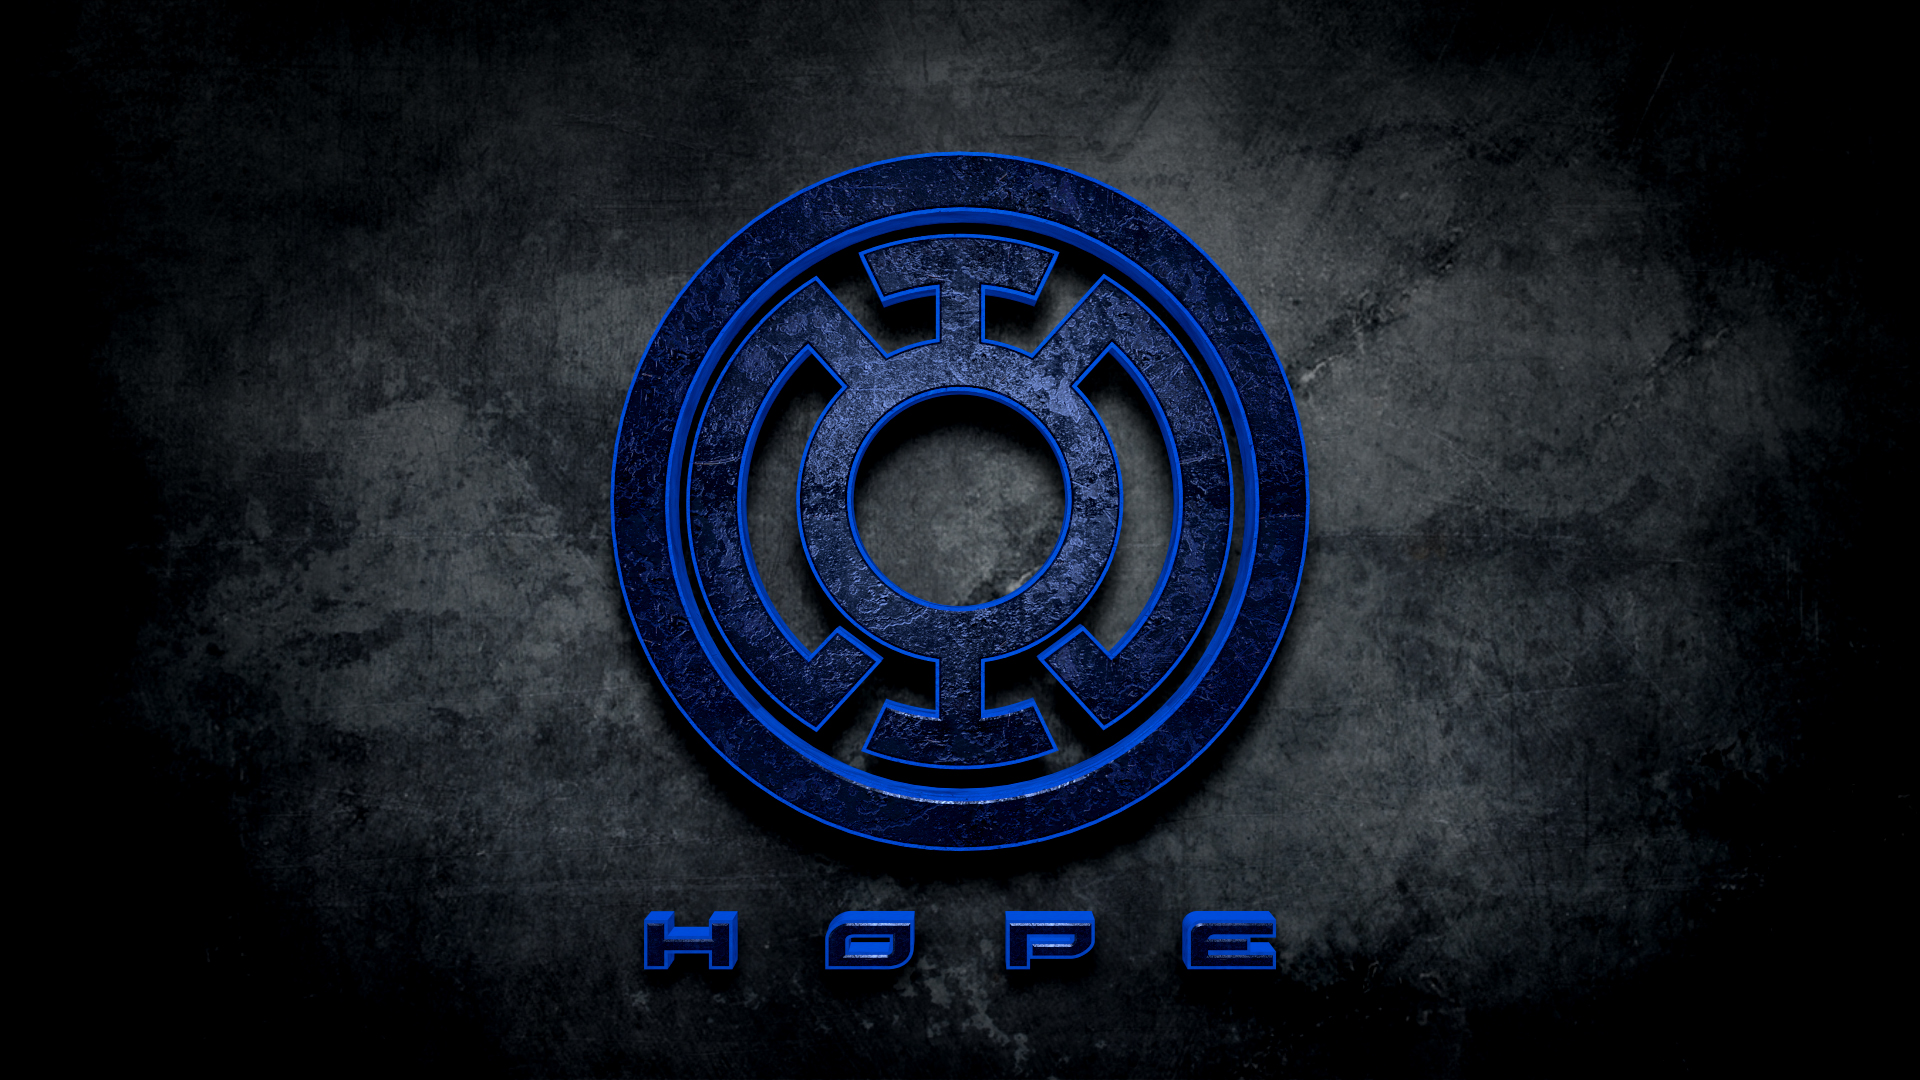 Blue Lantern High Quality Background on Wallpapers Vista